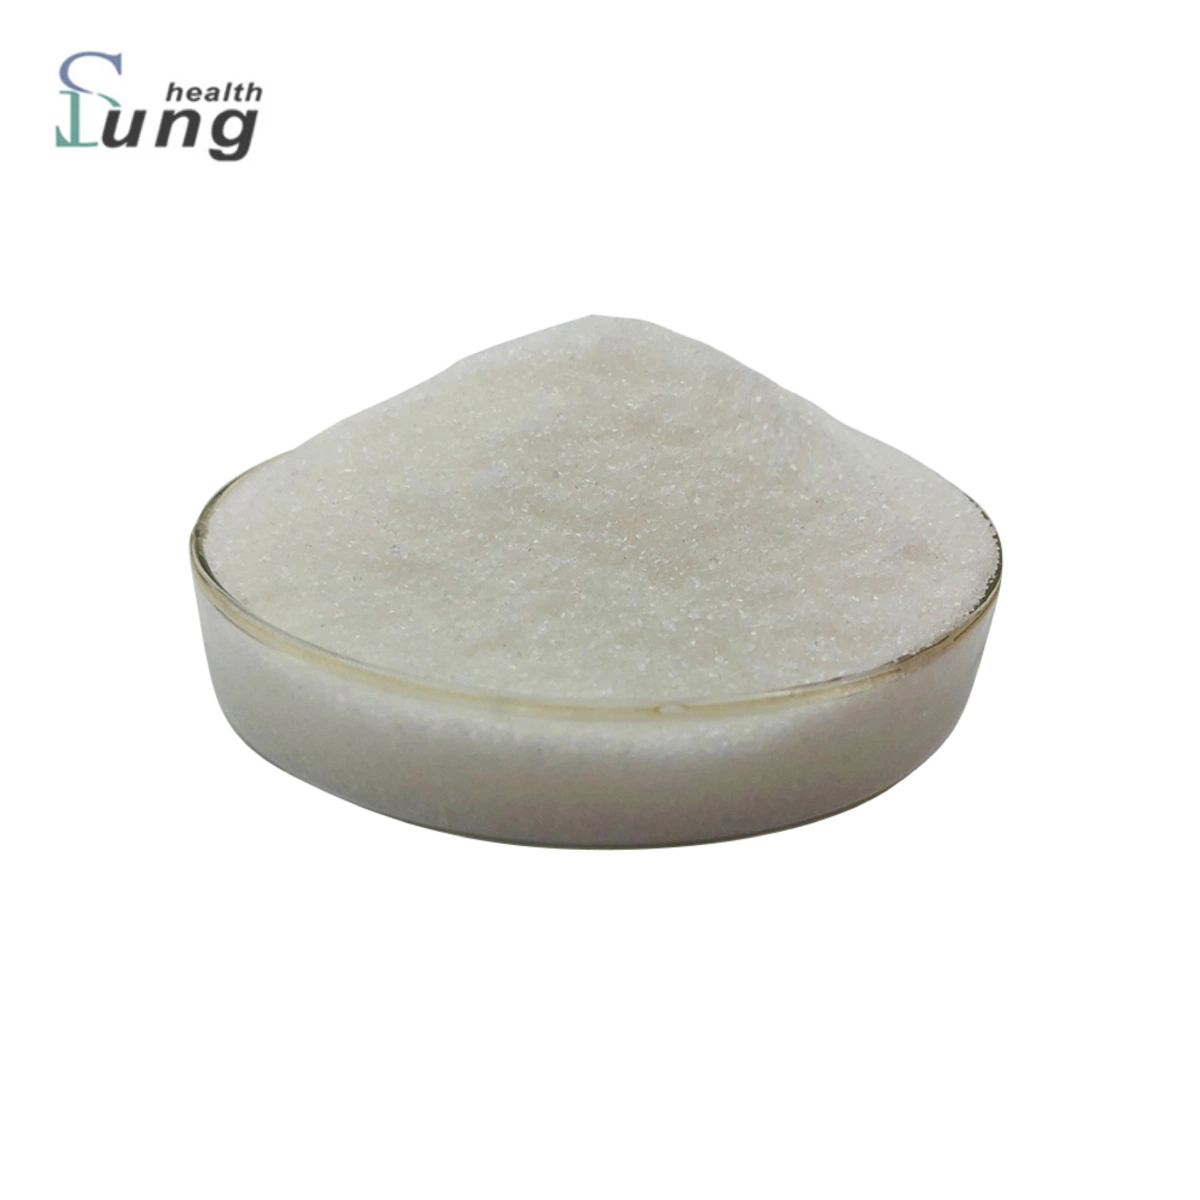 Pesticide Emamectin Benzoate Insecticide Emamectin Benzoate Powder Emamectin Benzoate